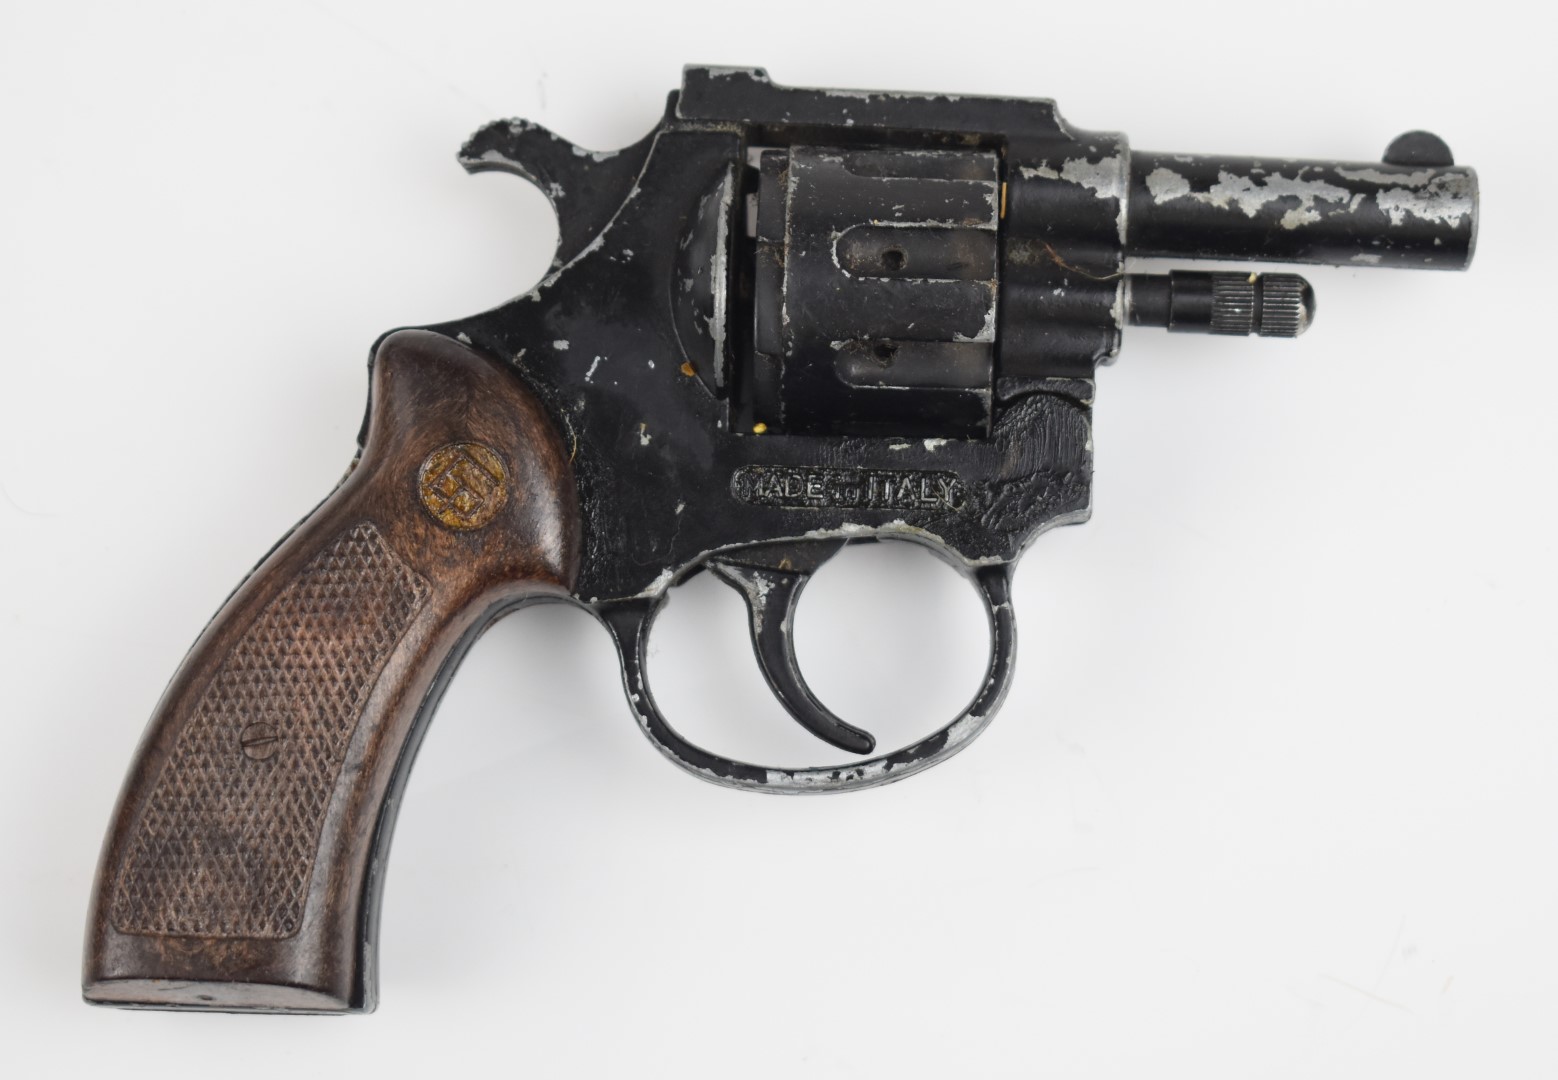 Eight replica or blank firing pistols and revolvers including Luger, StripMatic etc. - Image 9 of 9